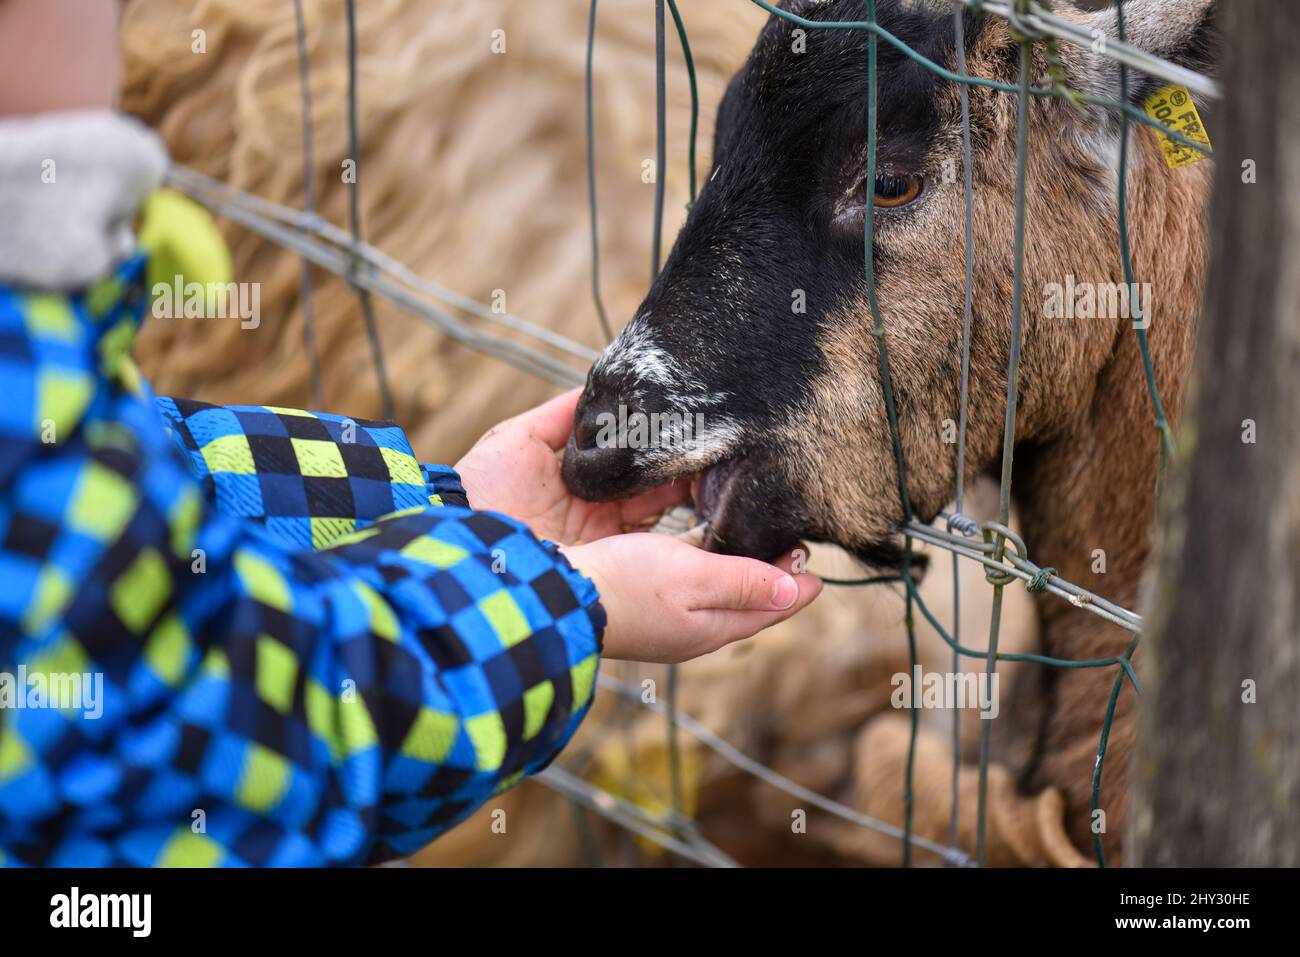 Little caucasian boy feeding goat through a wire fence in a farm. Goat eating grains of cereal from the hands of a child. Stock Photo